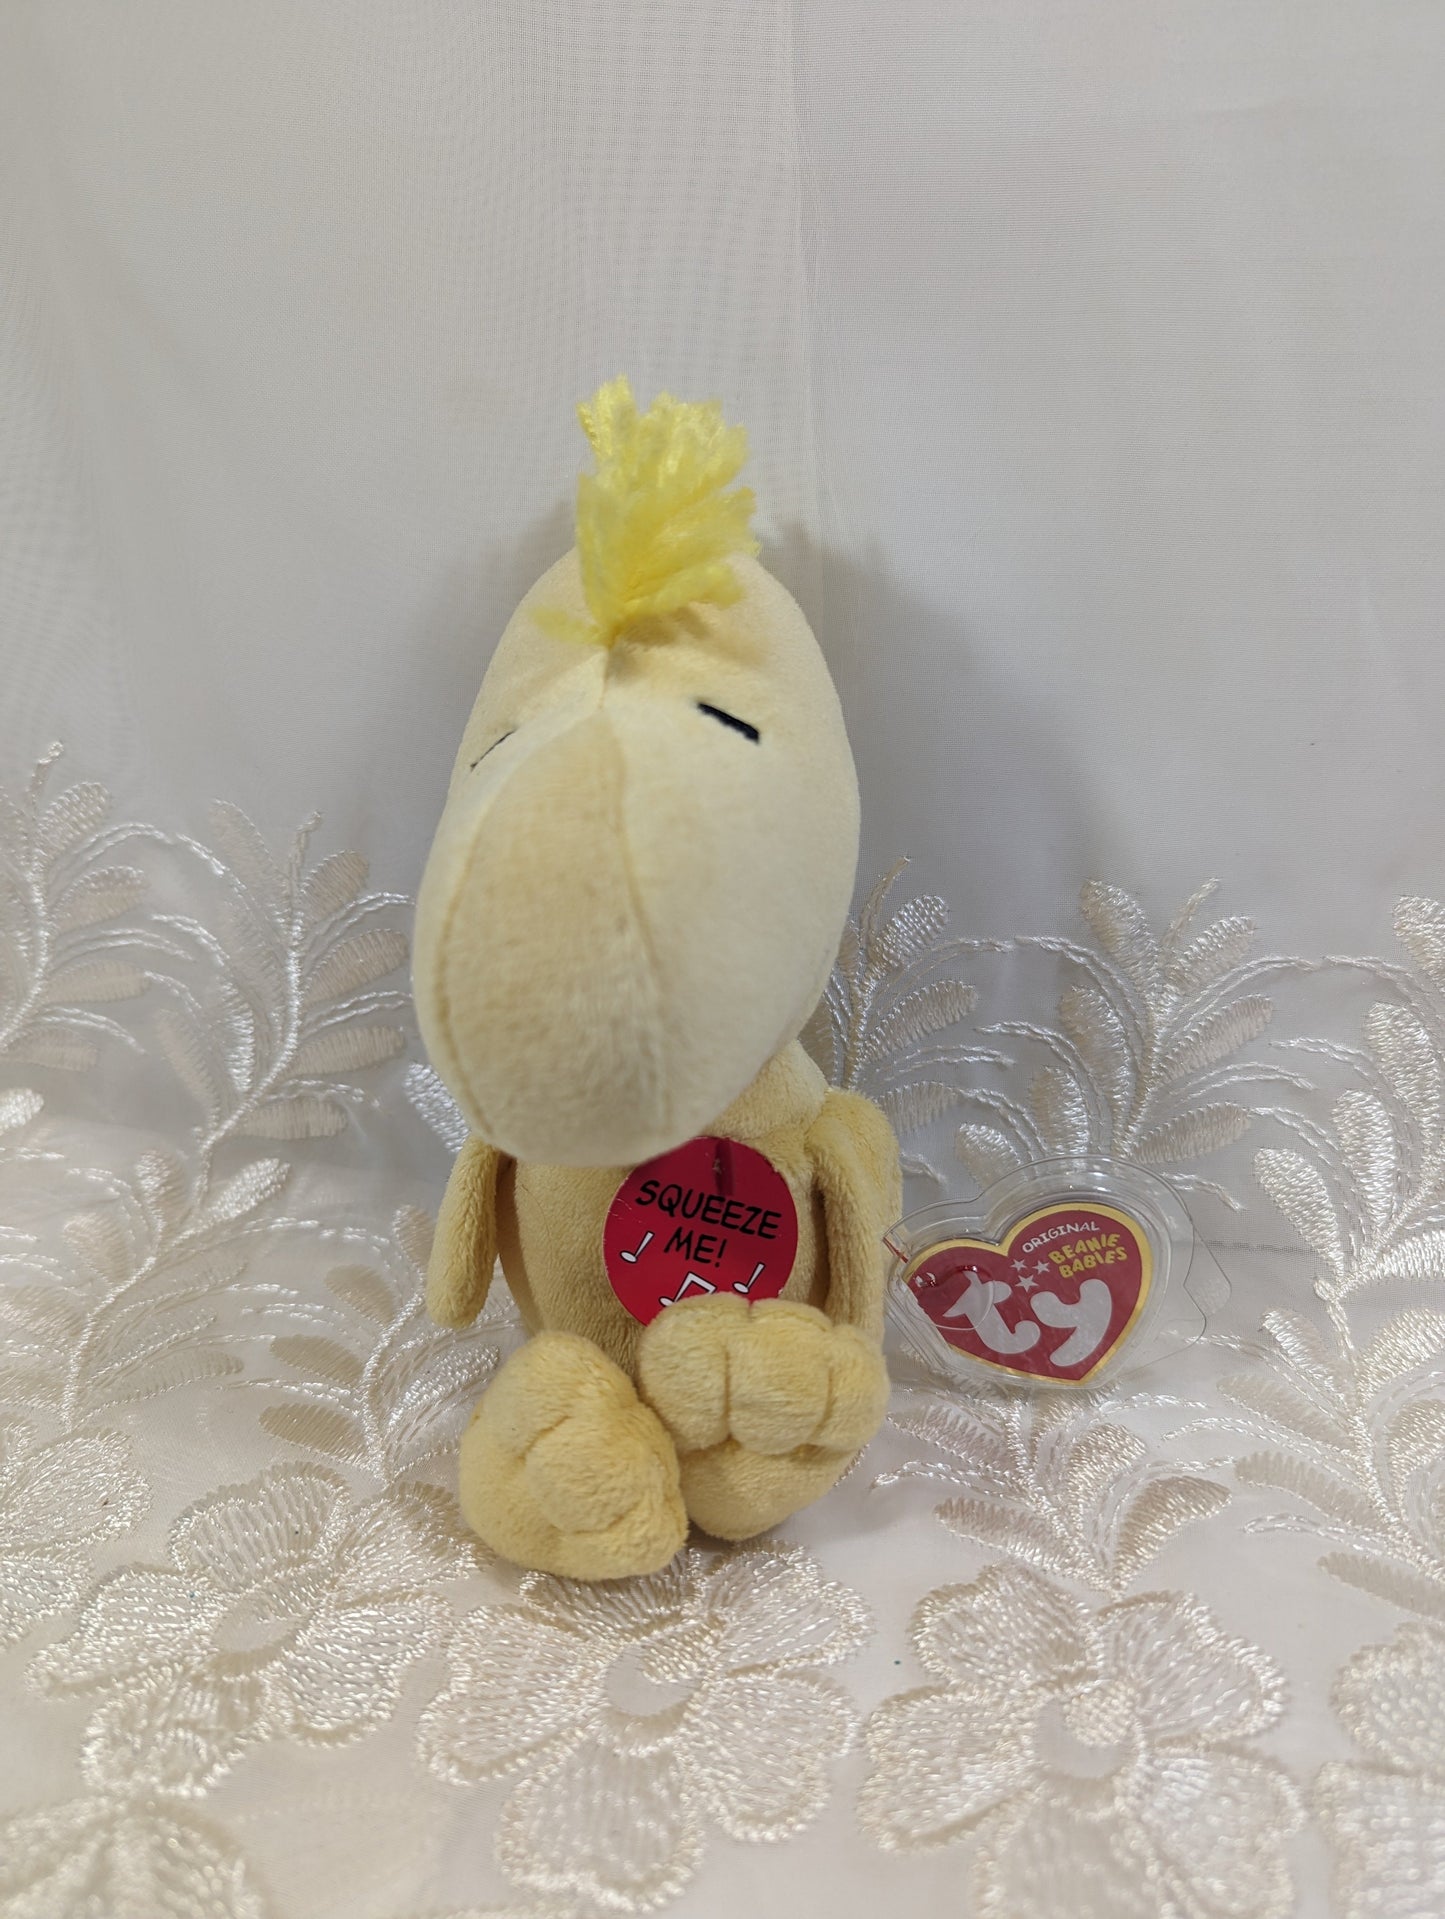 Ty Beanie Baby - Woodstock the Yellow Bird from Peanuts (6 in) No sound - Vintage Beanies Canada